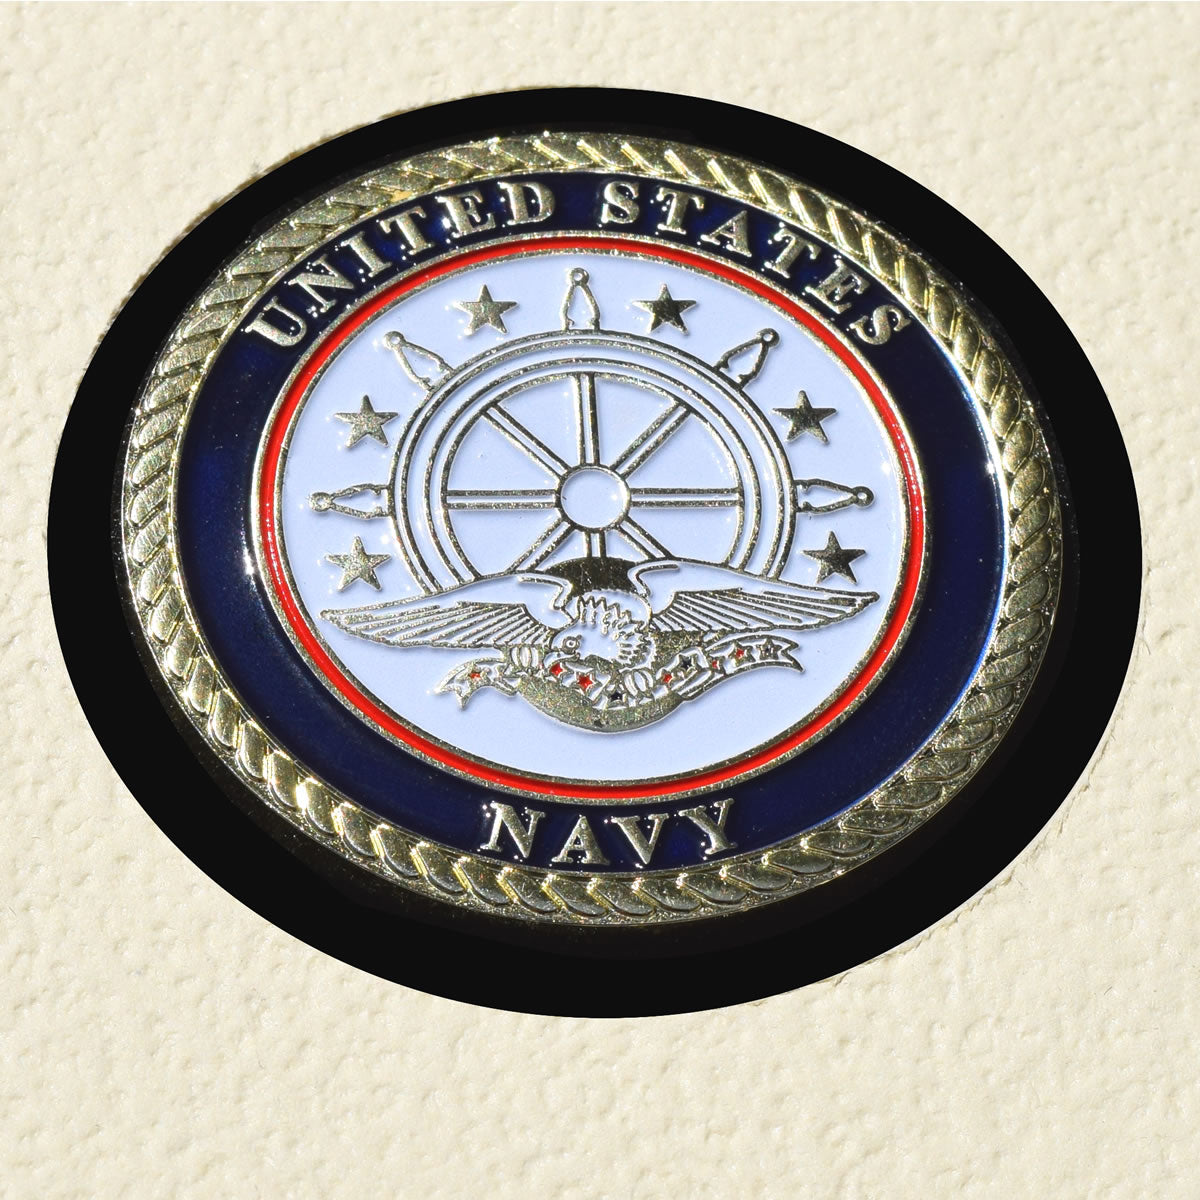 USS HULL DD-945 Detailed Coin